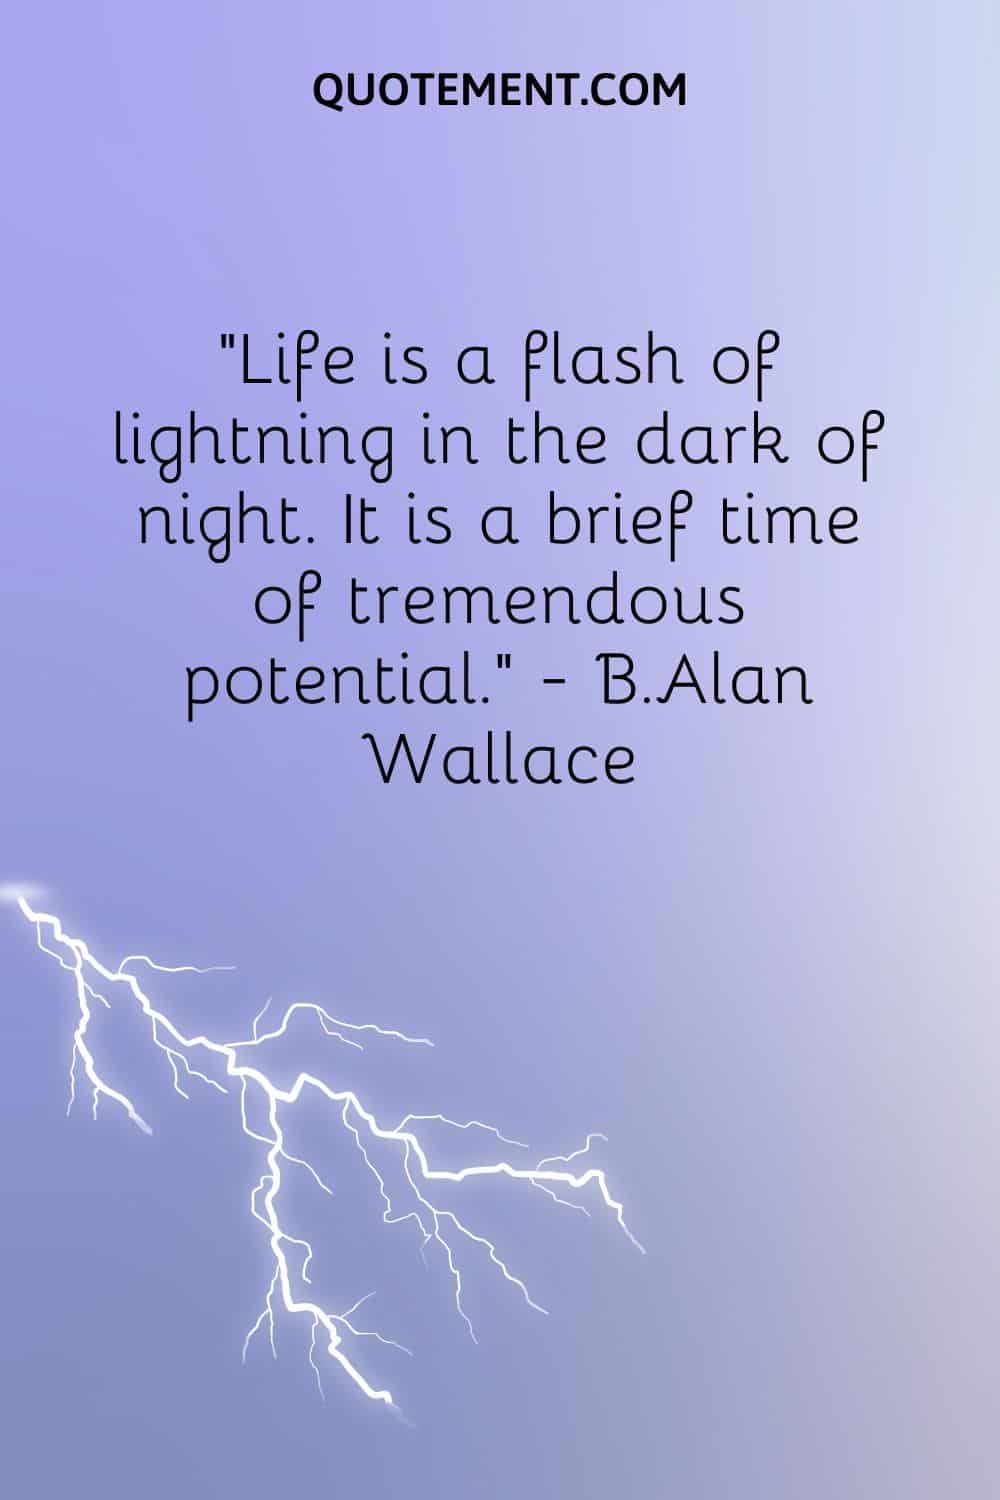 Life is a flash of lightning in the dark of night